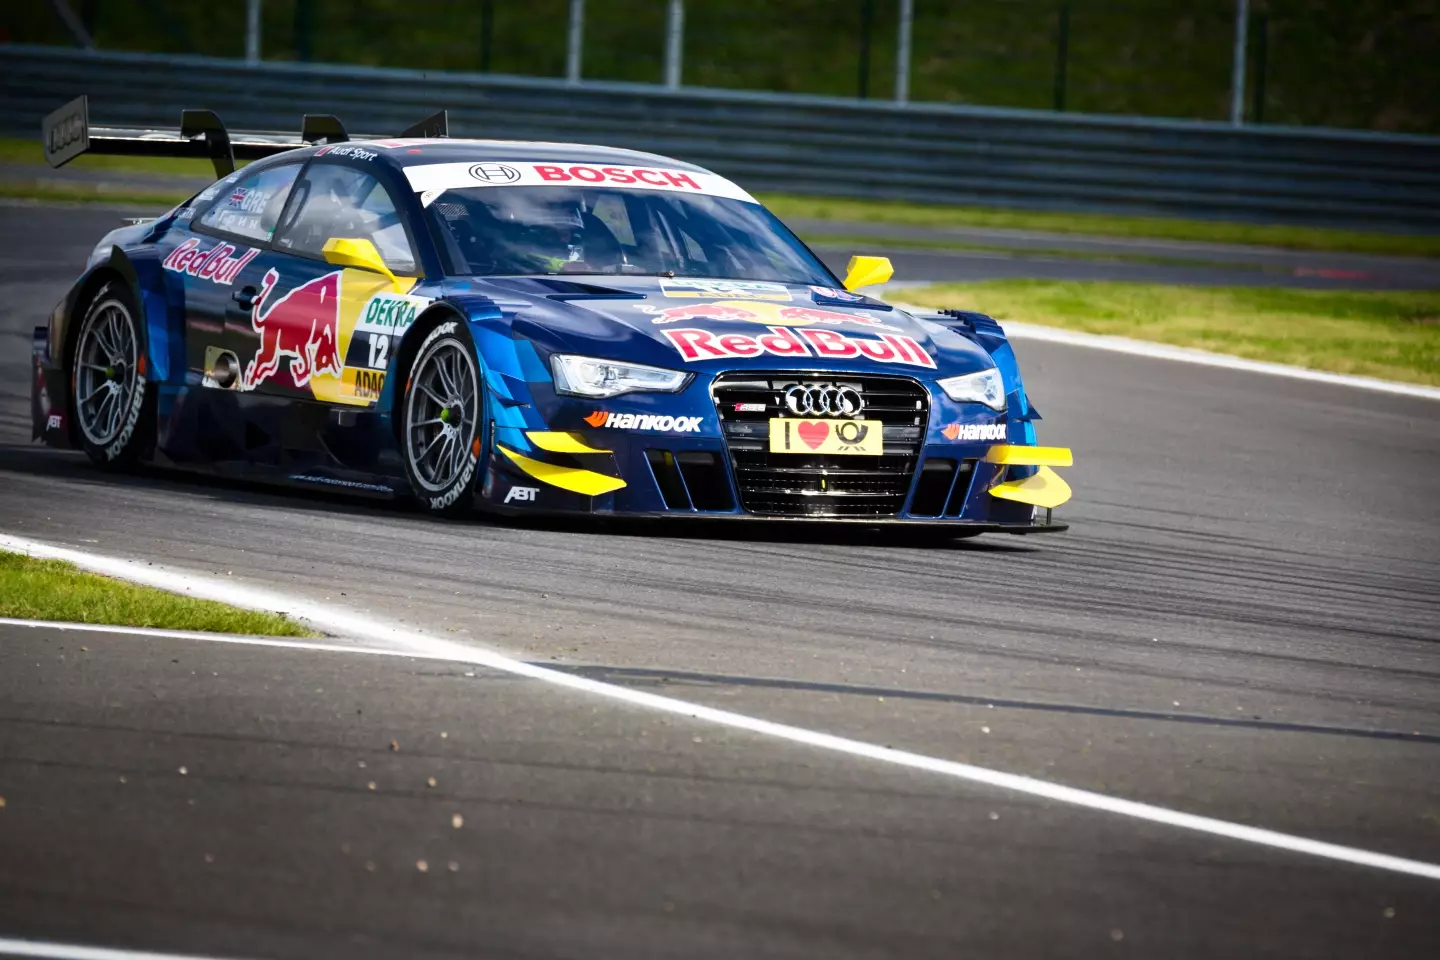 An Audi car competing in the DTM championship in 2013. Image: PA Images